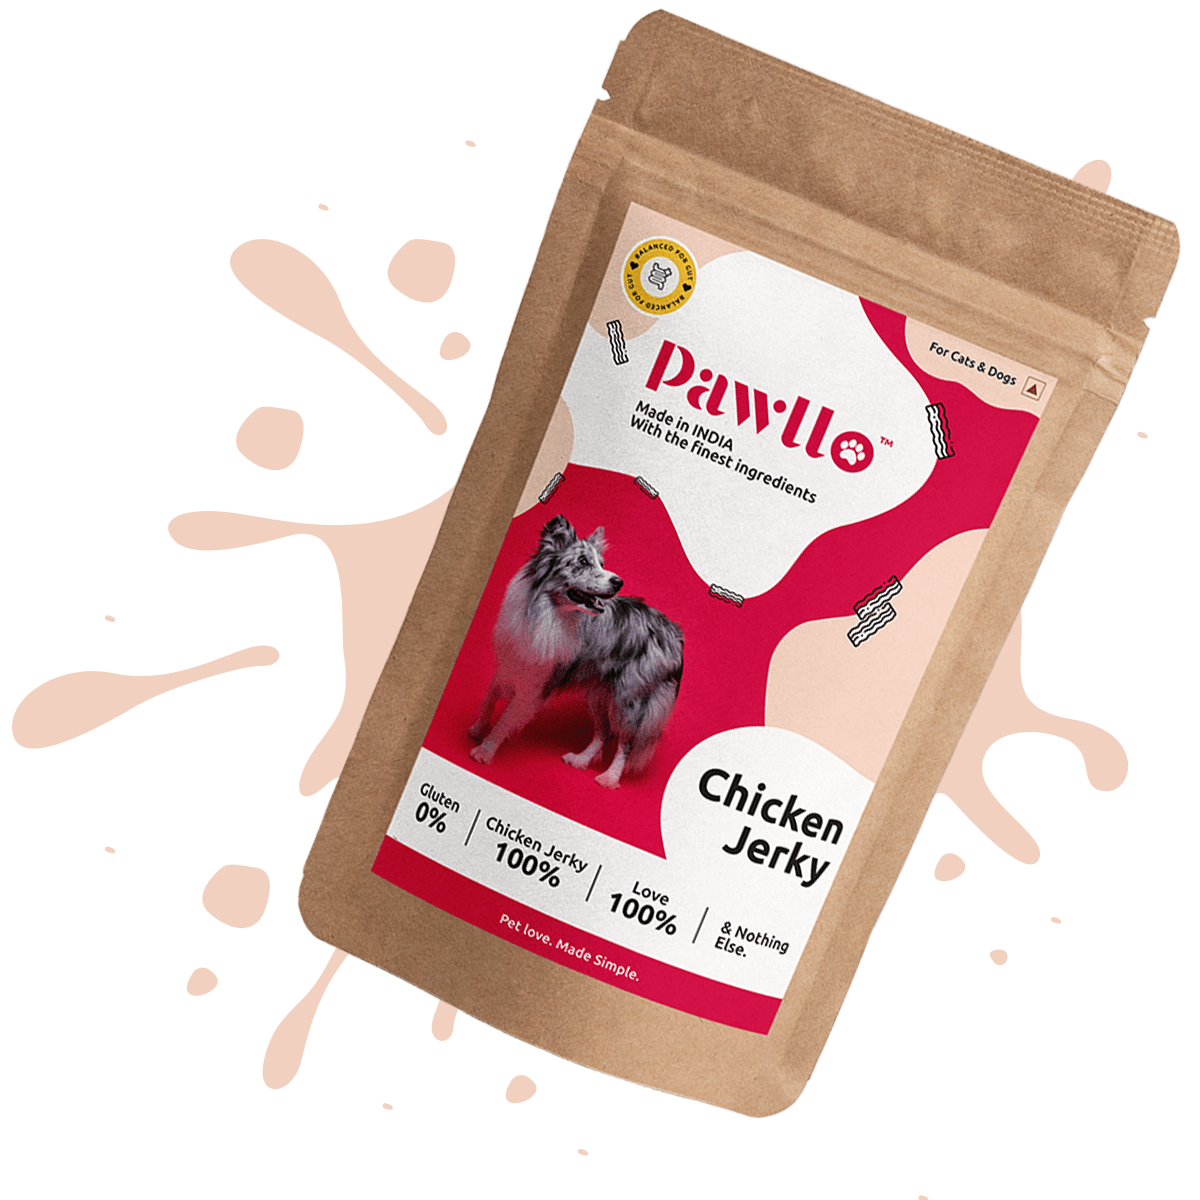 Chicken Jerky - Boneless Dehydrated Natural Protein Loaded Snack for Cats and Dogs - 100% Chicken